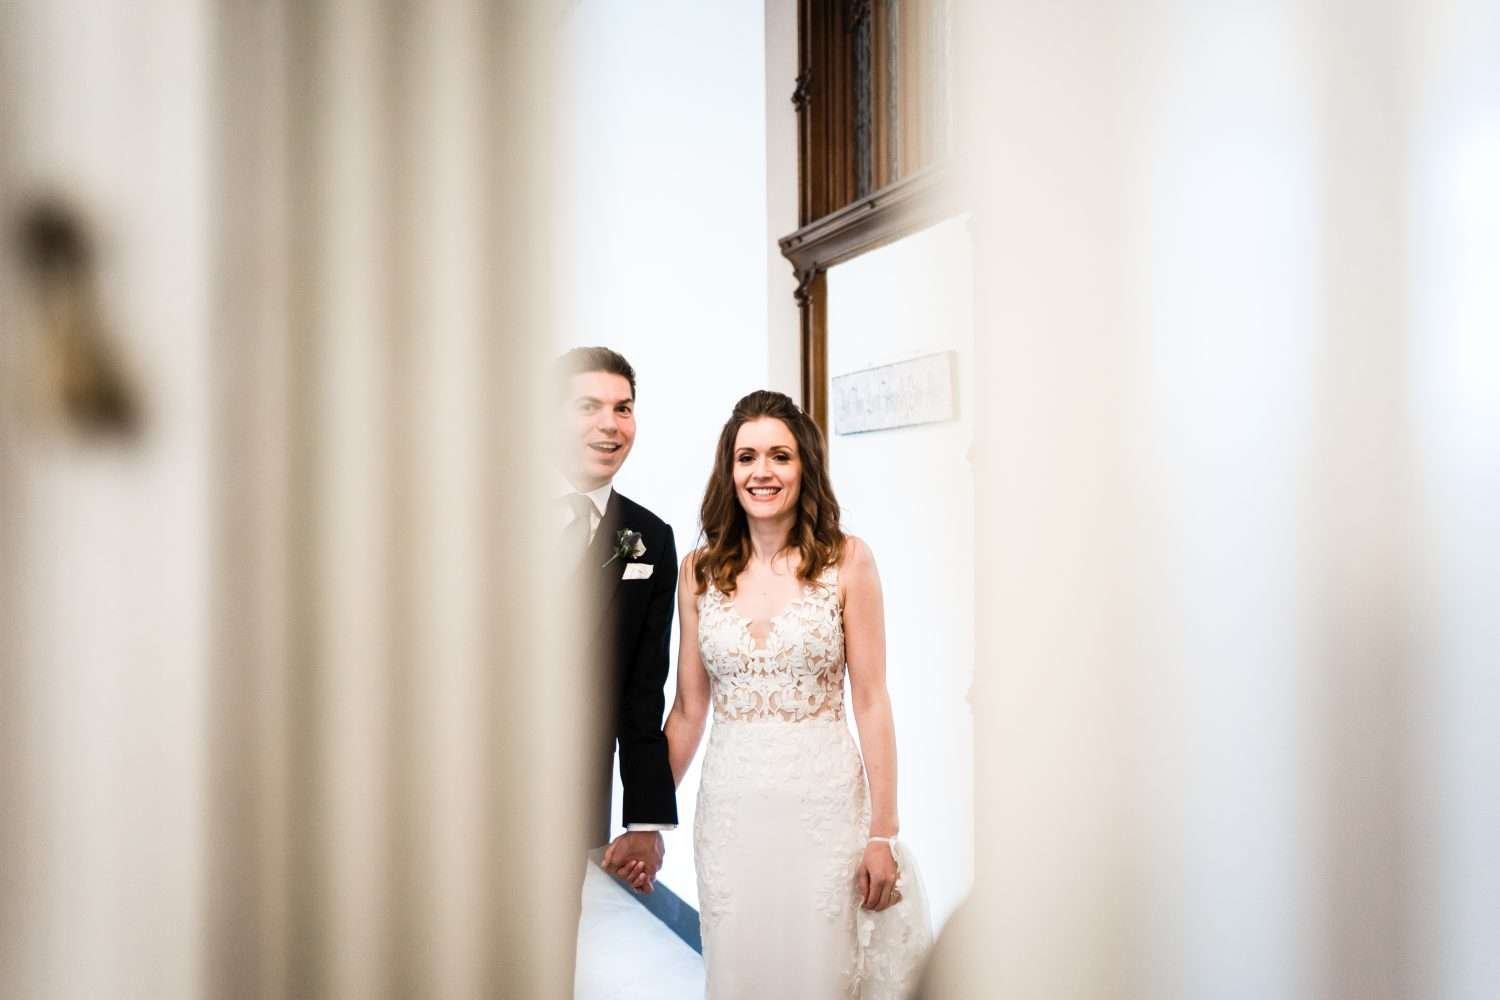 bride and groom wait to enter the dining room for their wedding breakfast
